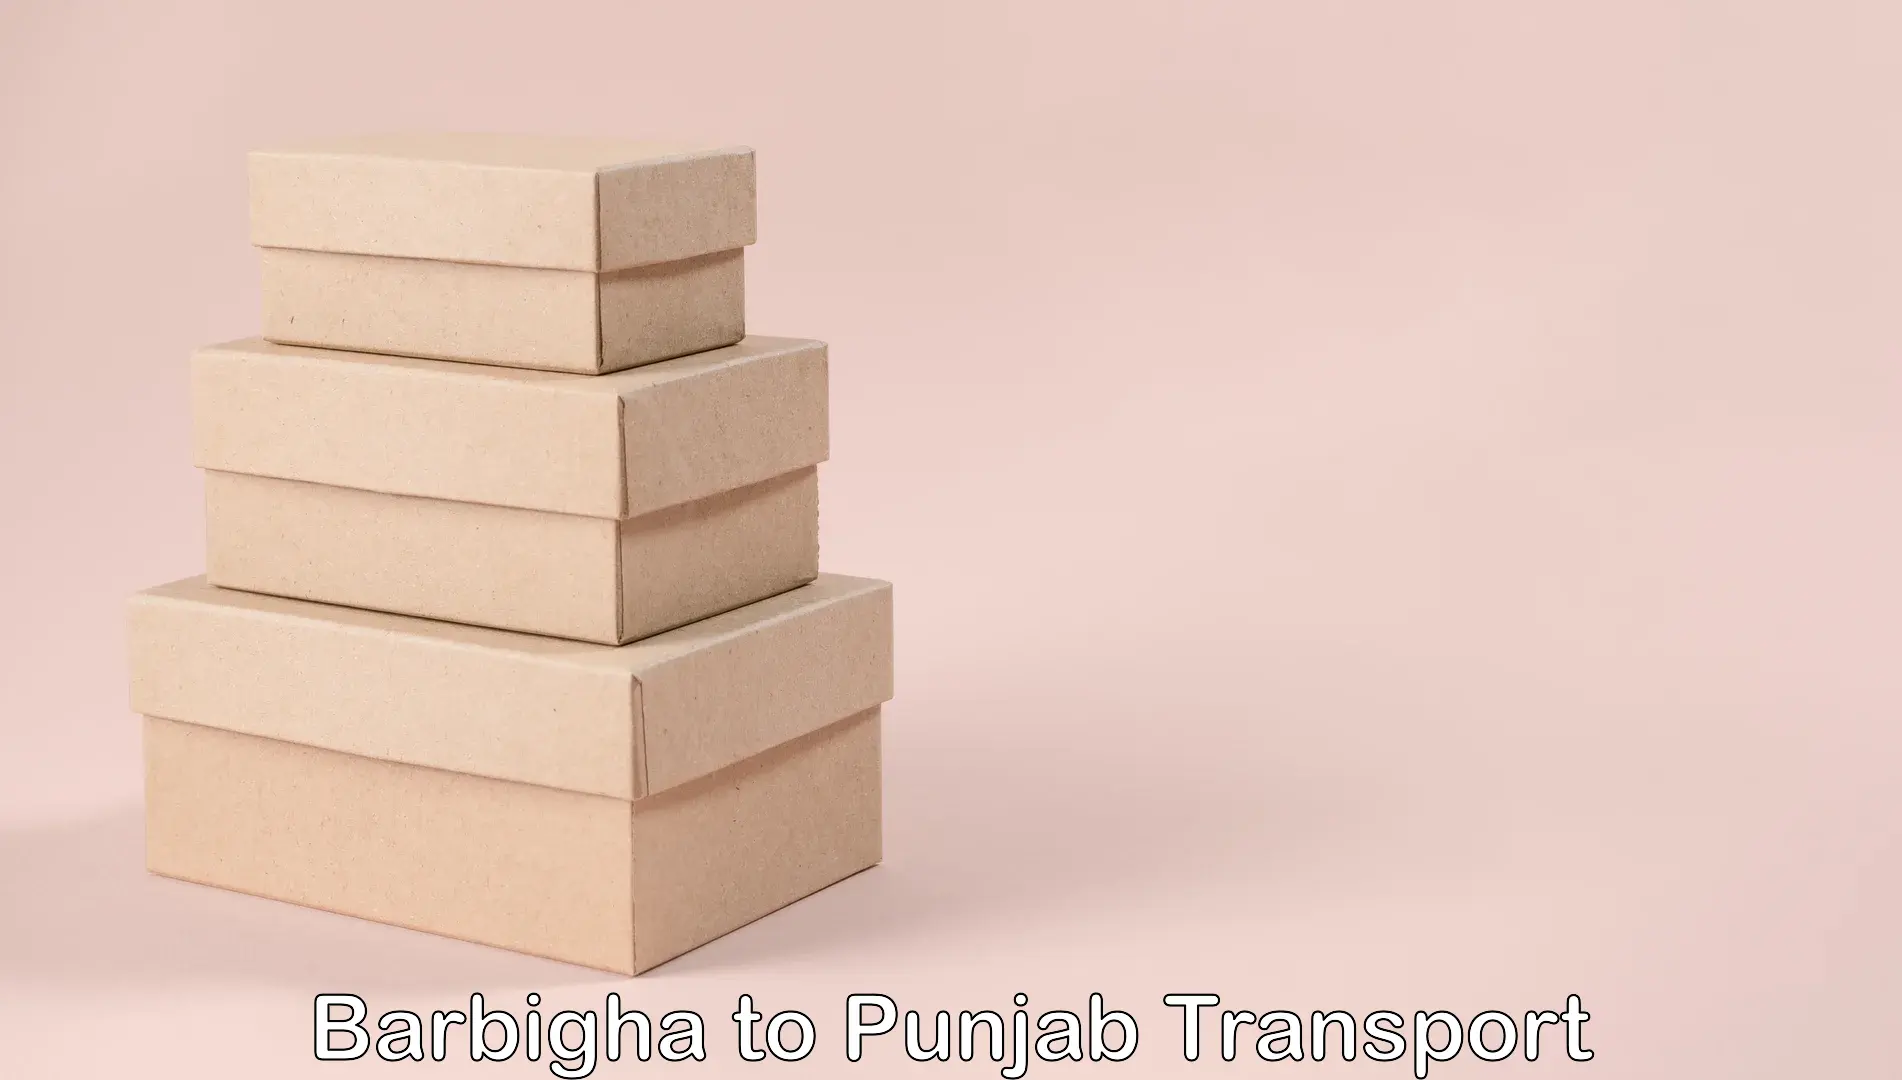 Container transport service Barbigha to Ludhiana